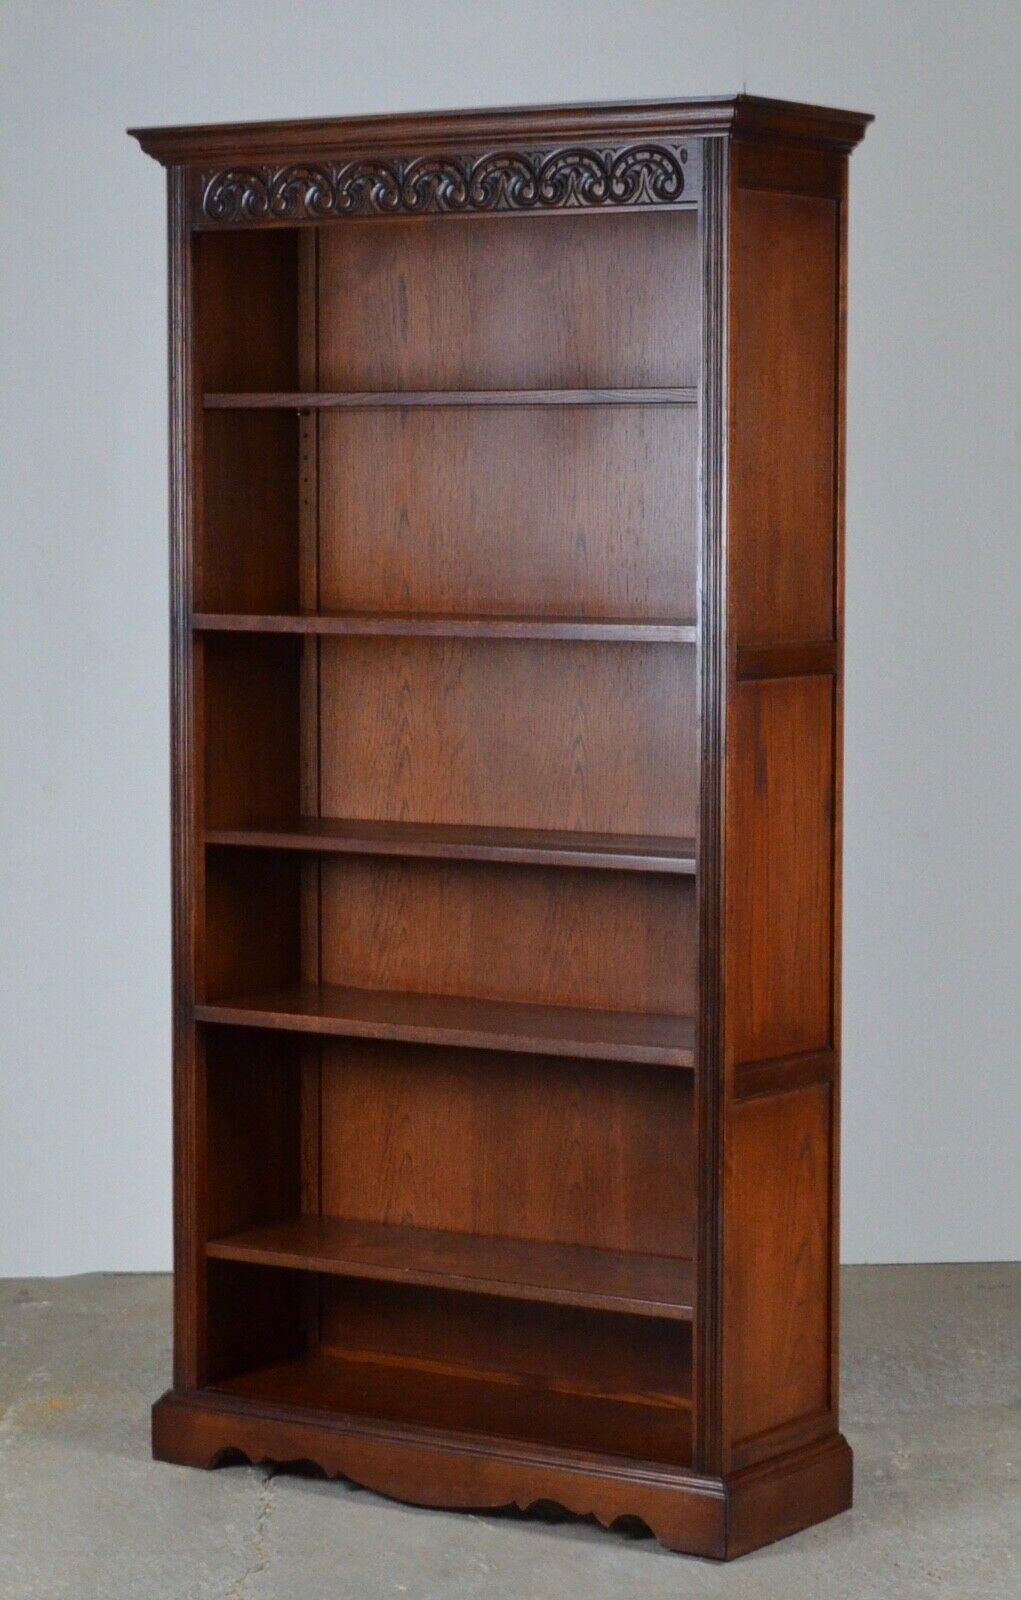 English Old Charm Made in England Oak Timber Library Bookcases Adjustable Shelves